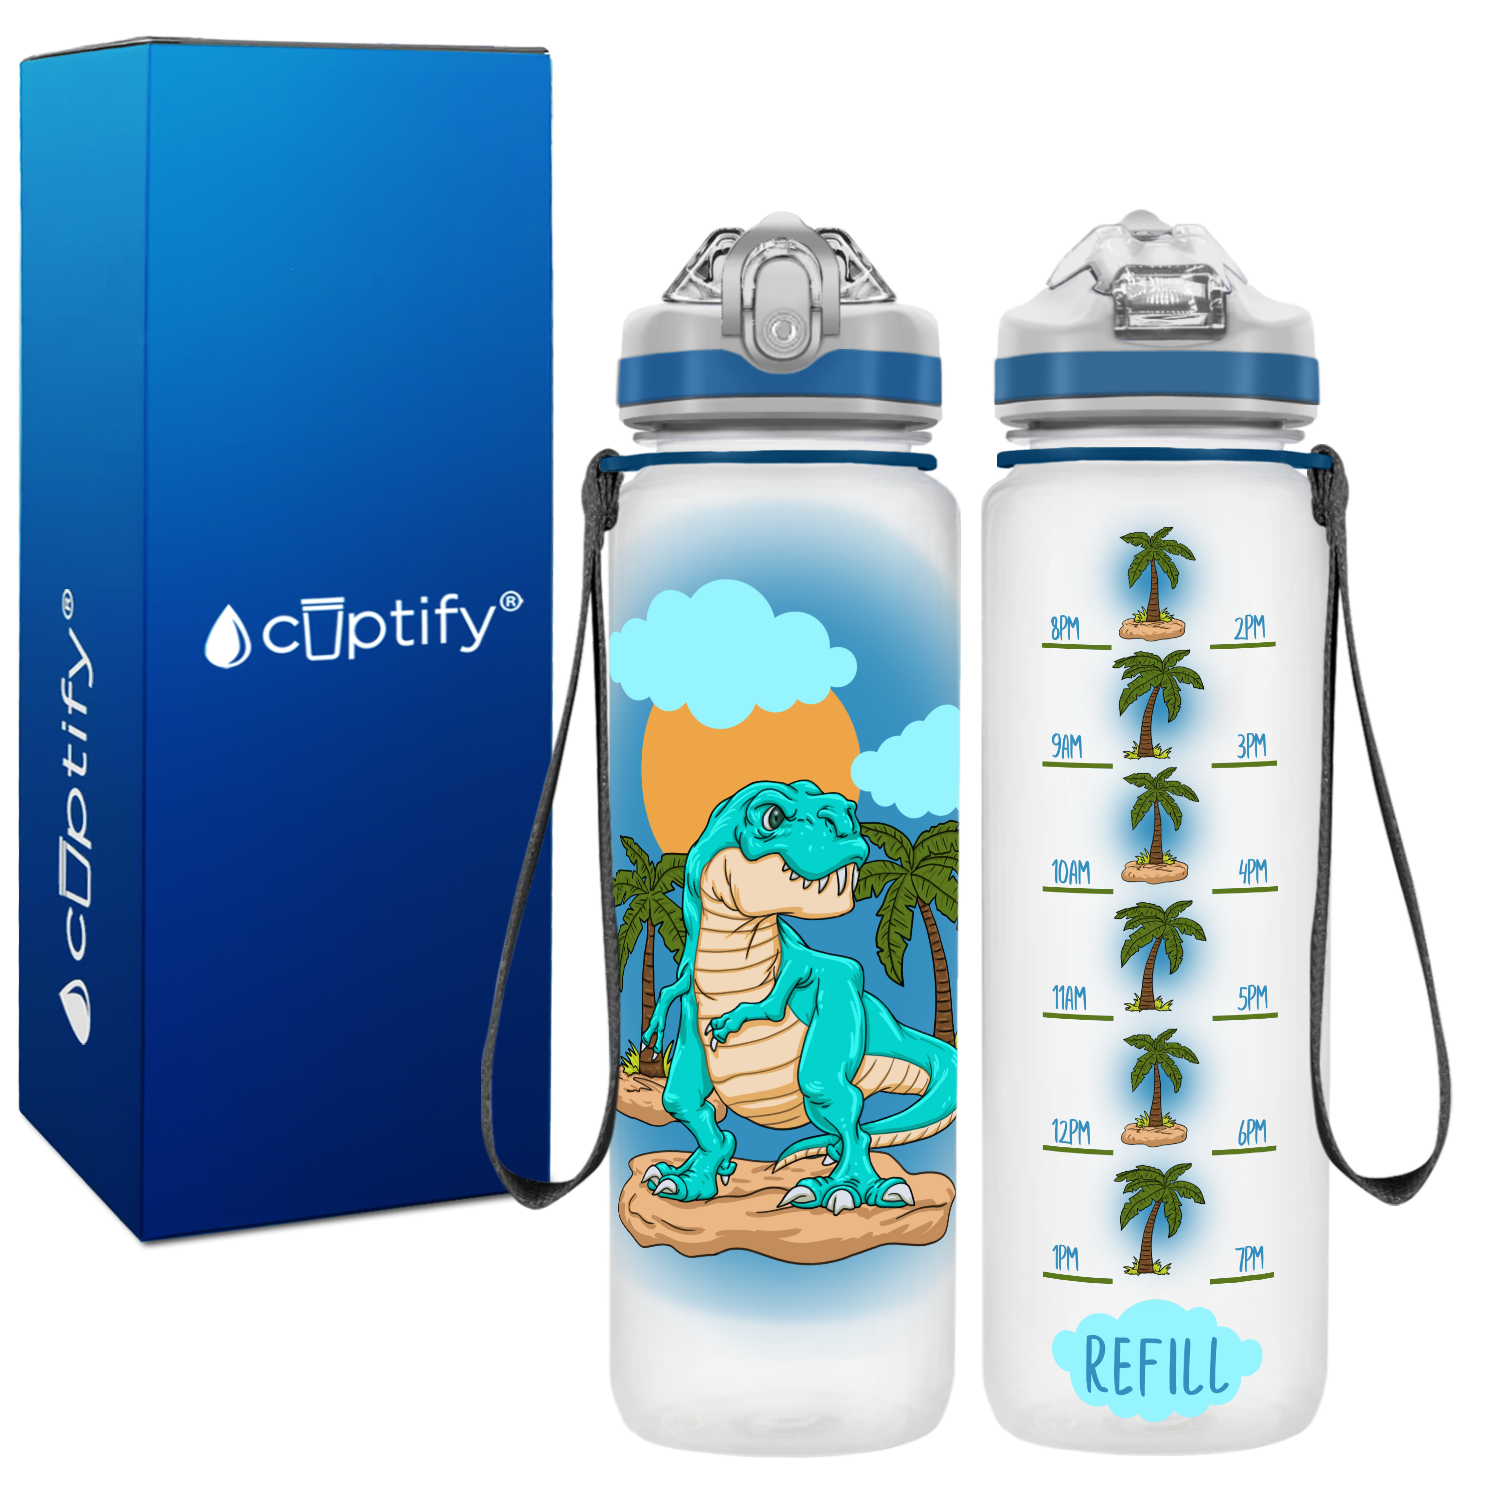 Personalized Kids Water Bottle - Hands Off